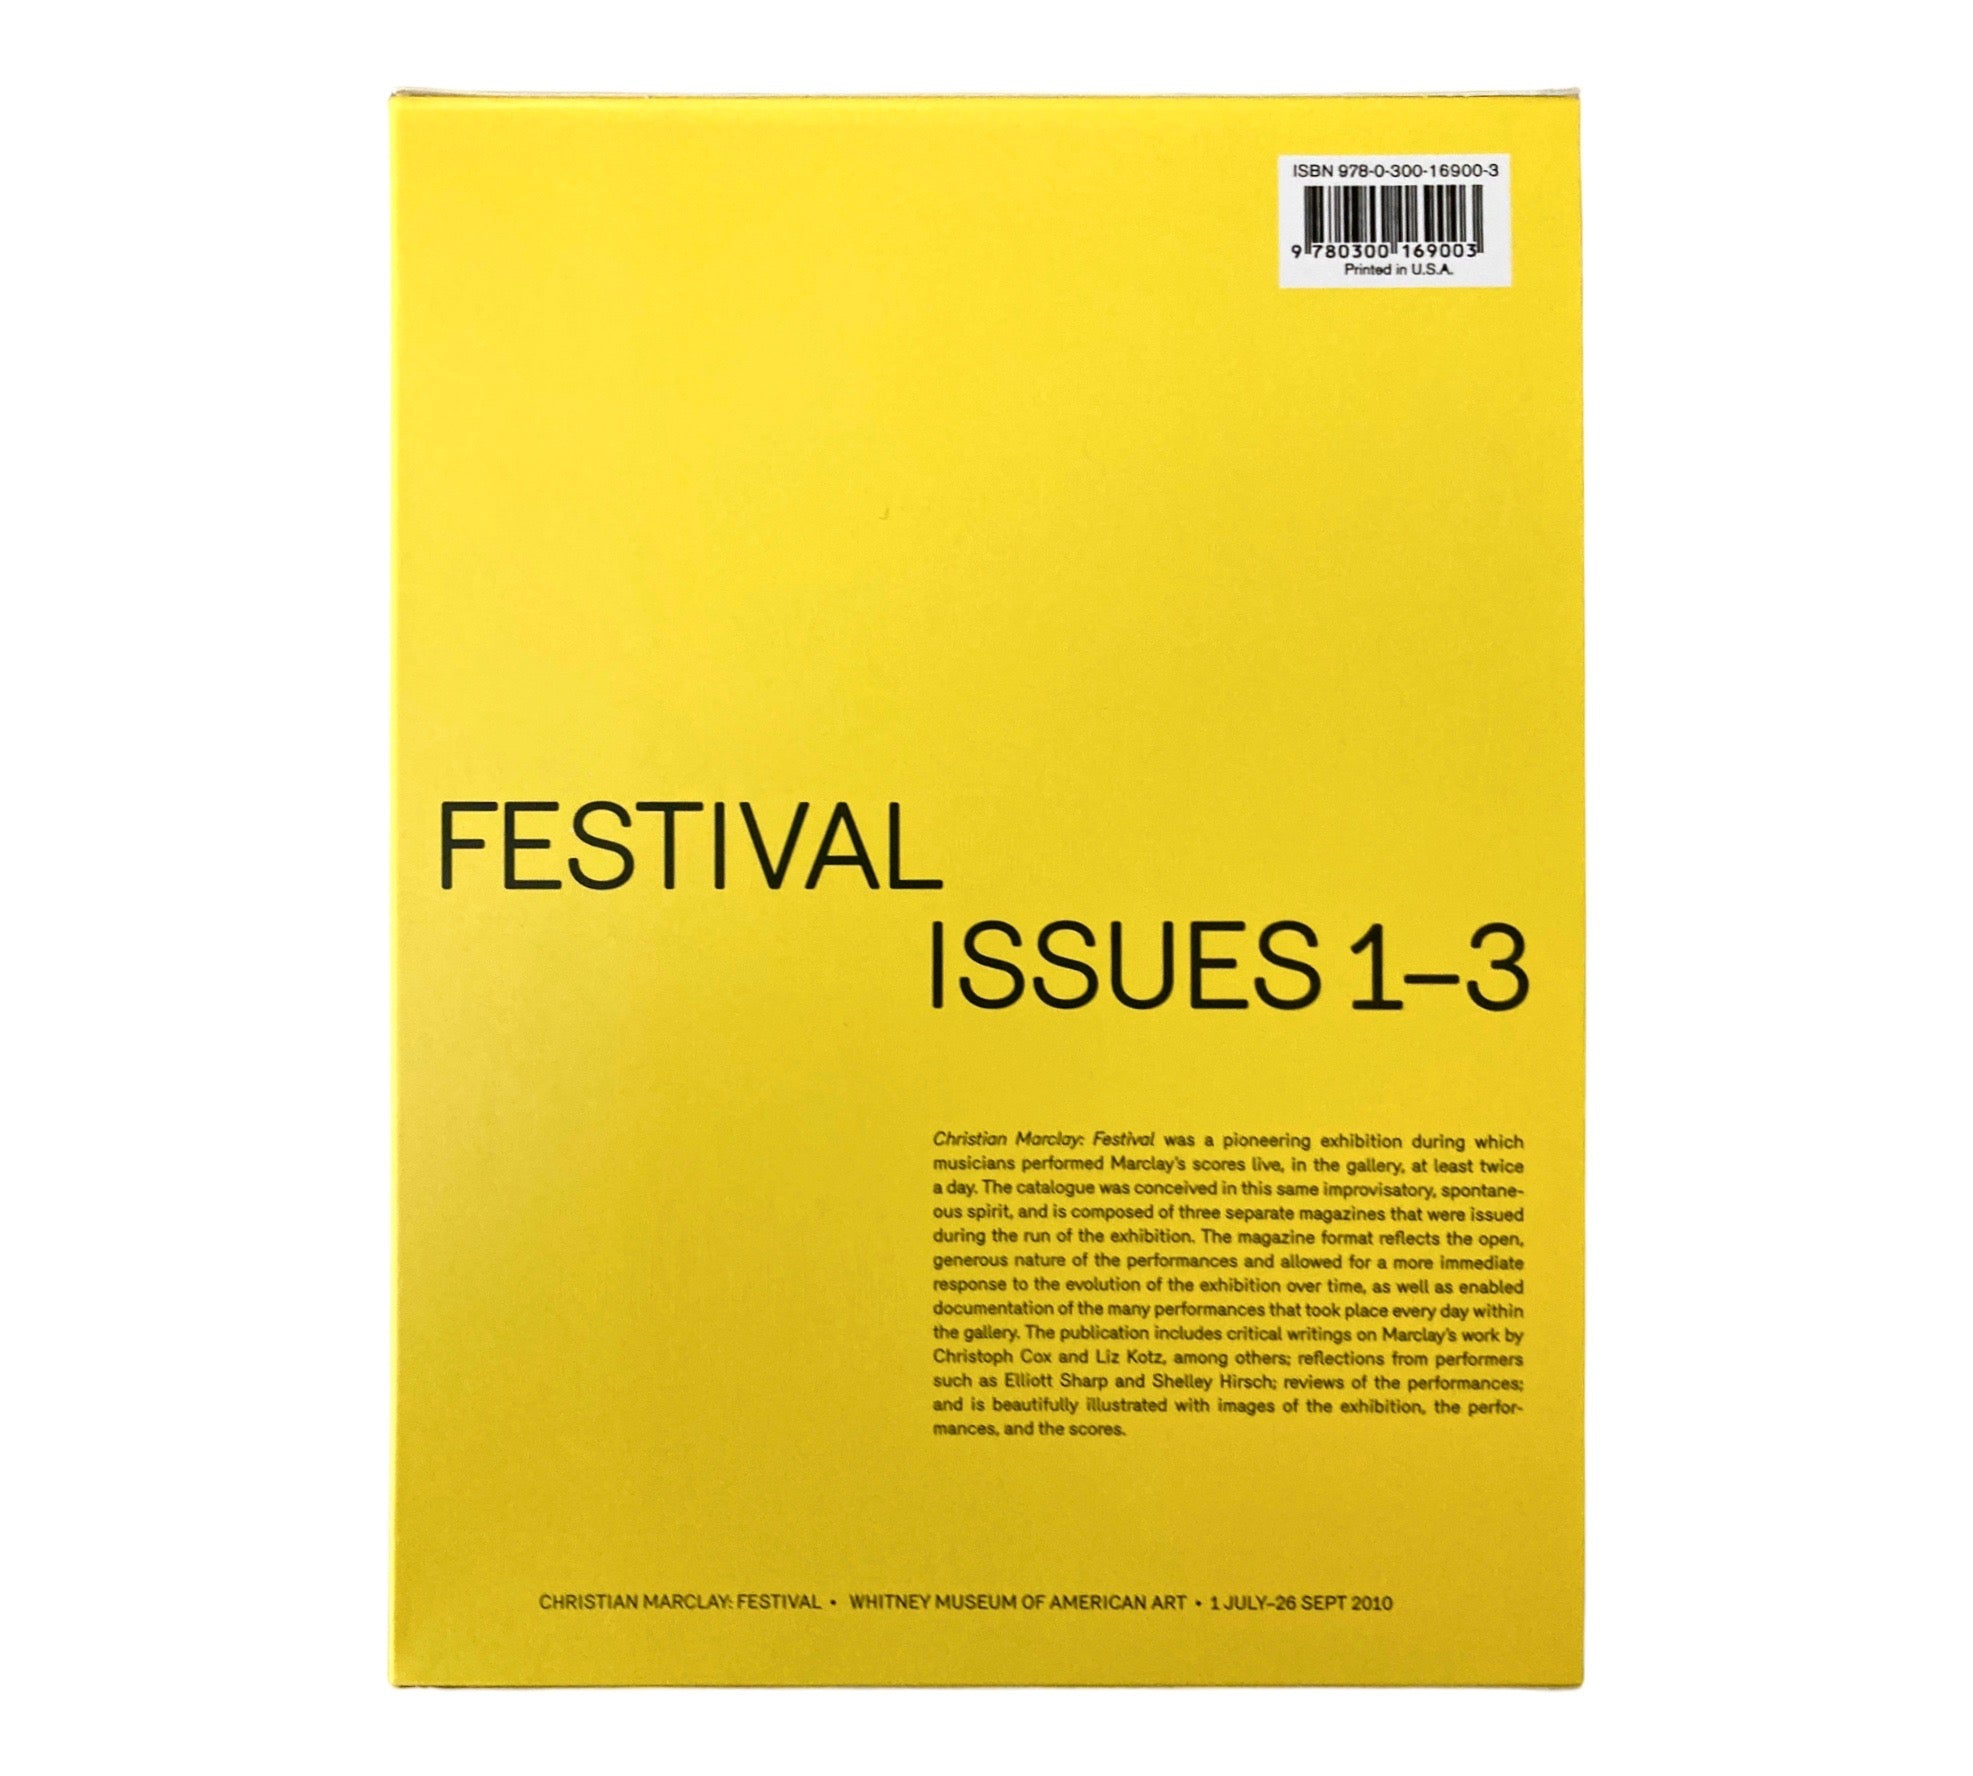 Christian Marclay: Festival - Issues 1-3